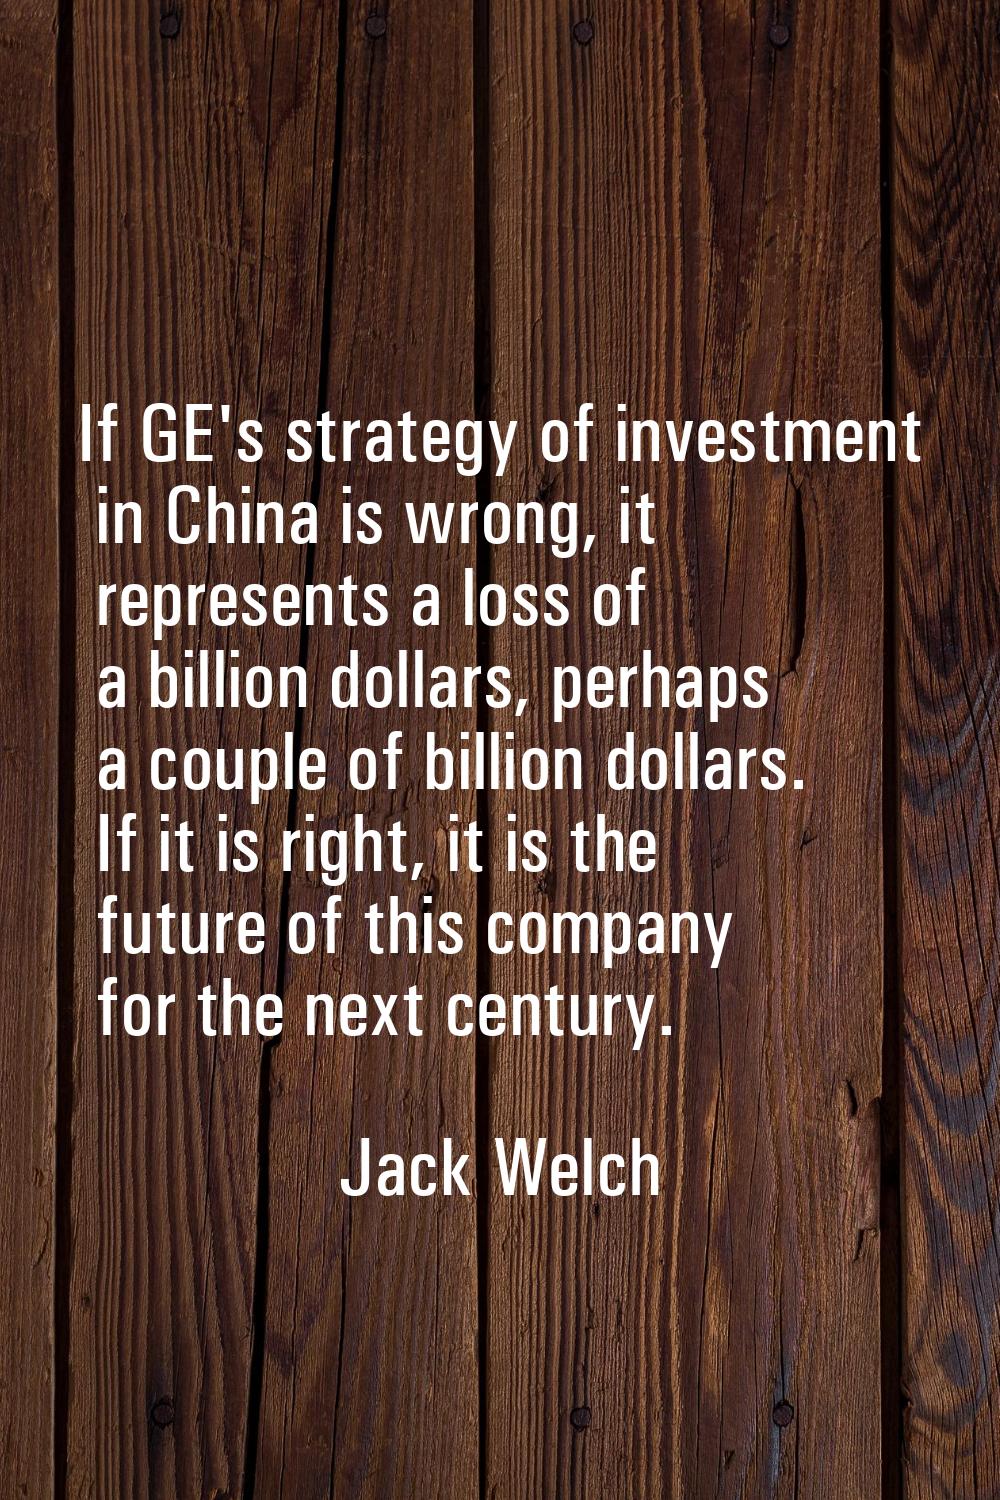 If GE's strategy of investment in China is wrong, it represents a loss of a billion dollars, perhap